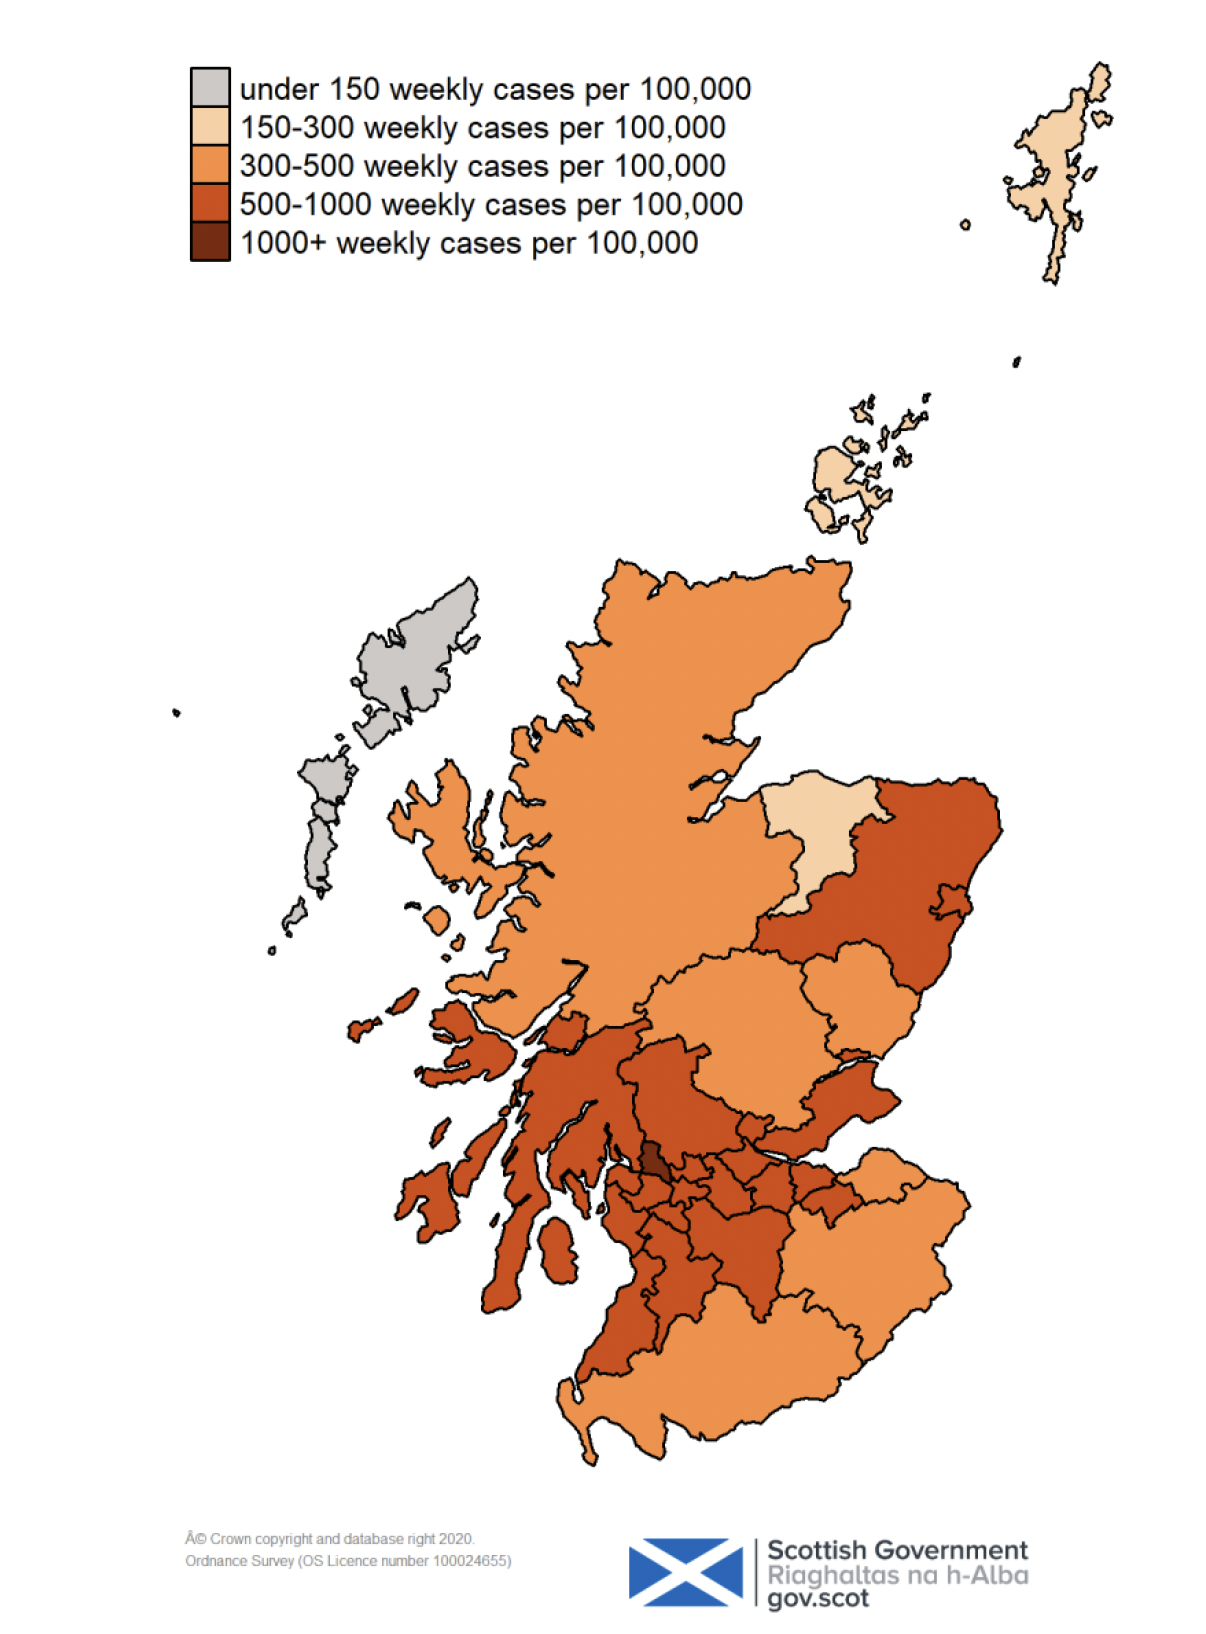 This colour coded map of Scotland shows the different rates of weekly positive cases per 100,000 people across Scotland’s Local Authorities. The colours range from grey for under 150 weekly cases per 100,000, through very light orange for 150 to 300, orange for 300-500, darker orange for 500-1,000, and very dark orange for over 1,000 weekly cases per 100,000 people. 
West Dunbartonshire is the only local authority showing as very dark orange on the map, with over 1,000 weekly cases. Na h-Eileanan Siar is shown as grey, with under 150 weekly cases per 100,000 people. Moray, Orkney and Shetland are showing as very light orange with 150-300 weekly cases. Angus, Dumfries and Galloway, East Lothian, Highland, Perth and Kinross and Scottish Borders are showing as orange with 300-500 weekly cases per 100,000 people. All other local authorities are shown as darker orange with 500-1,000 weekly cases per 100,000.
